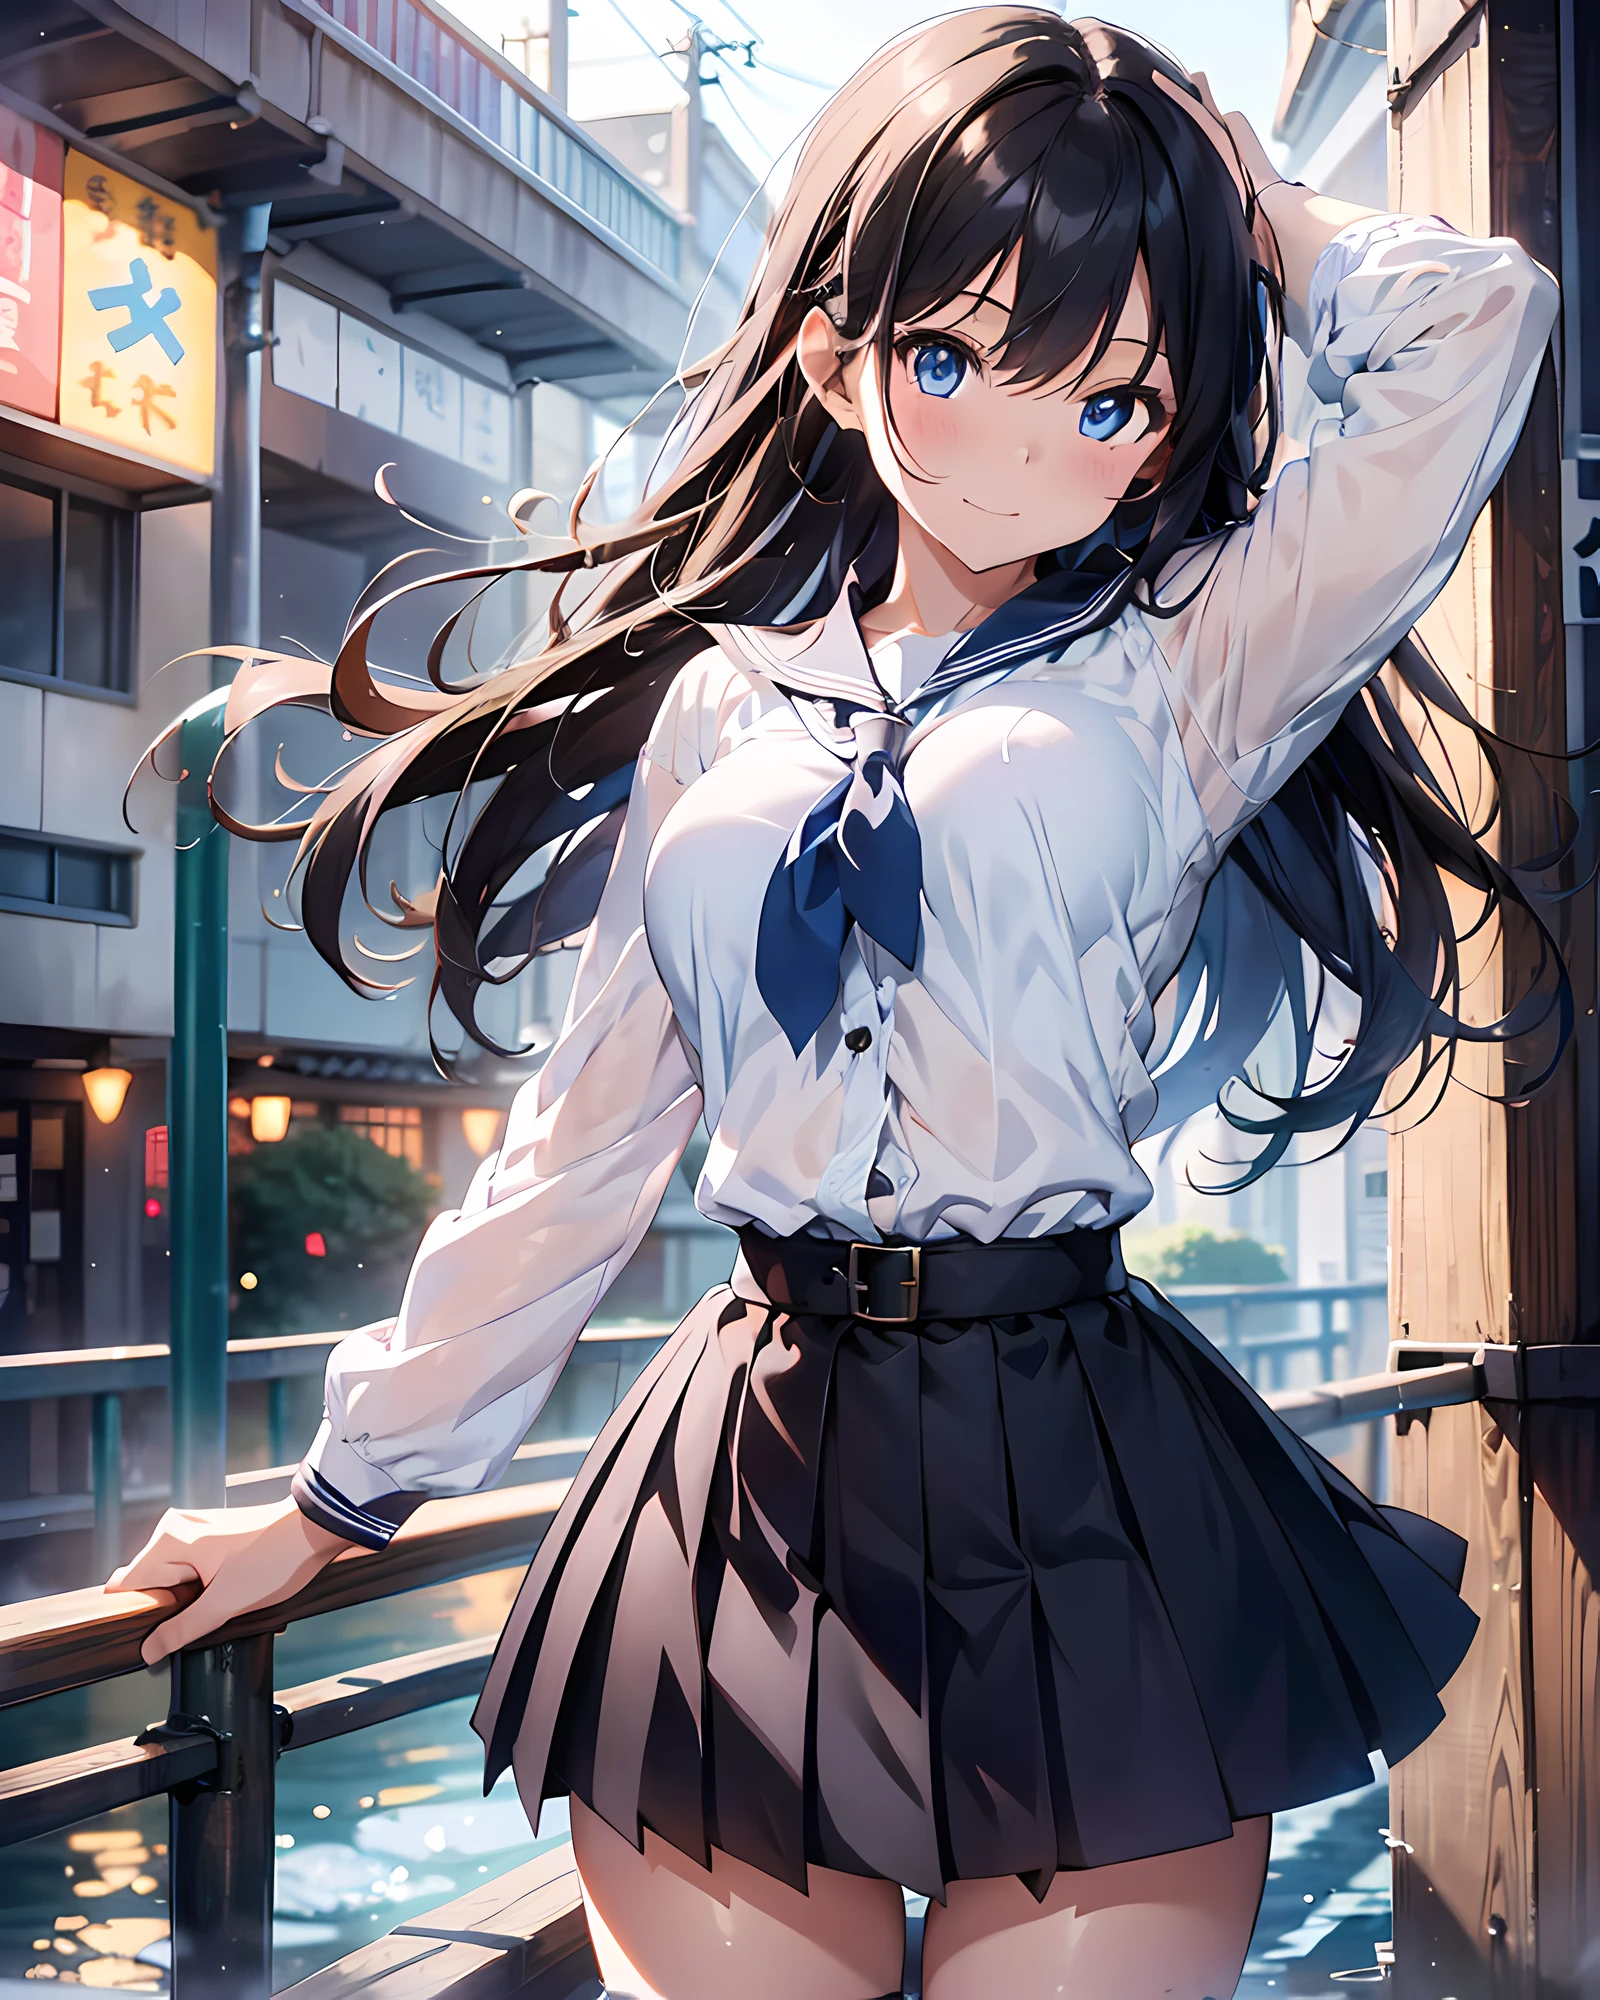 anime style illustration, highres, ultra detailed, (1girl:1.3), (dynamic pose):1.0 BREAK, cowboy shot, (pale skin:1.3), ((detailed blue eyes)), (bokeh effect), (dynamic angle), 1 extremely beautiful and glamorous anime waifu at kamo river, (wearing a school girl outfit, pink sailor shirts and dark-grey pleats skirt, black stockings), BREAK, she has brown wavy two-side-up hair style, medium-breasted, light smile, happy, wind, 8 life size, detailed clothes, detailed body, detailed arms, human hands, detailed hands, perfect nose, blush, light smile, pink lip gloss, looking the viewer, facing the viewer, sexy model posing, extremely leaning forward against the viewer, studio soft light, cinematic light, detailed background, realistic, ultra-realistic, masterpiece, 32k ultra-sharp image, Japanese anime waifu, concept art by Kyoto animation, Makoto Shinkai,